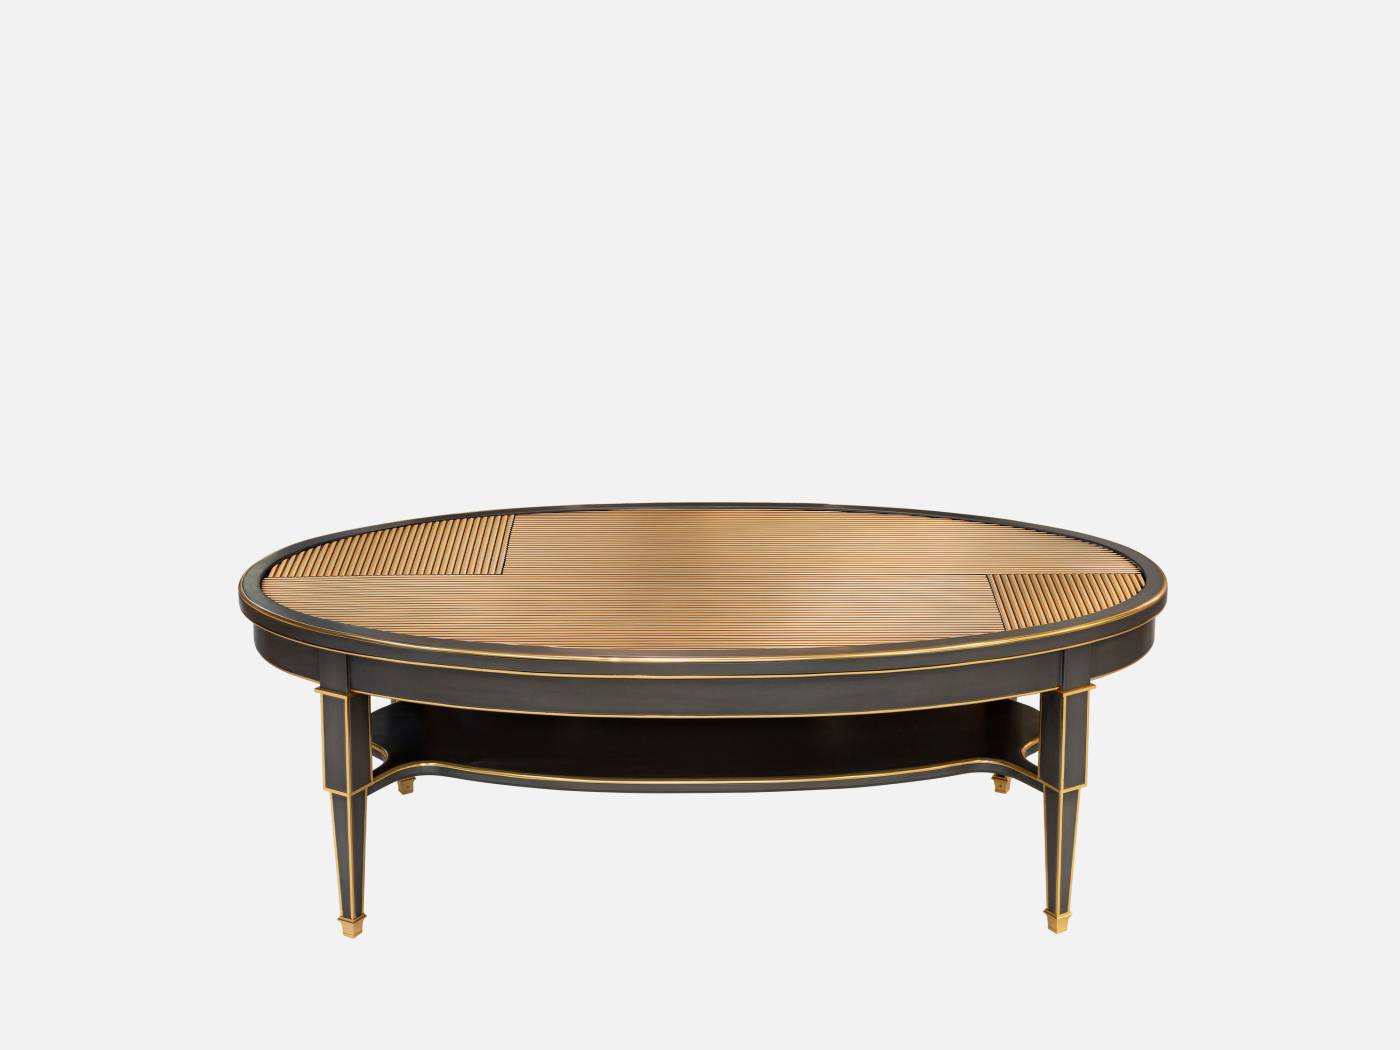 ART. 2219-1 – Discover the elegance of luxury classic Small tables made in Italy by C.G. Capelletti. Luxury classic furniture that combines style and craftsmanship.